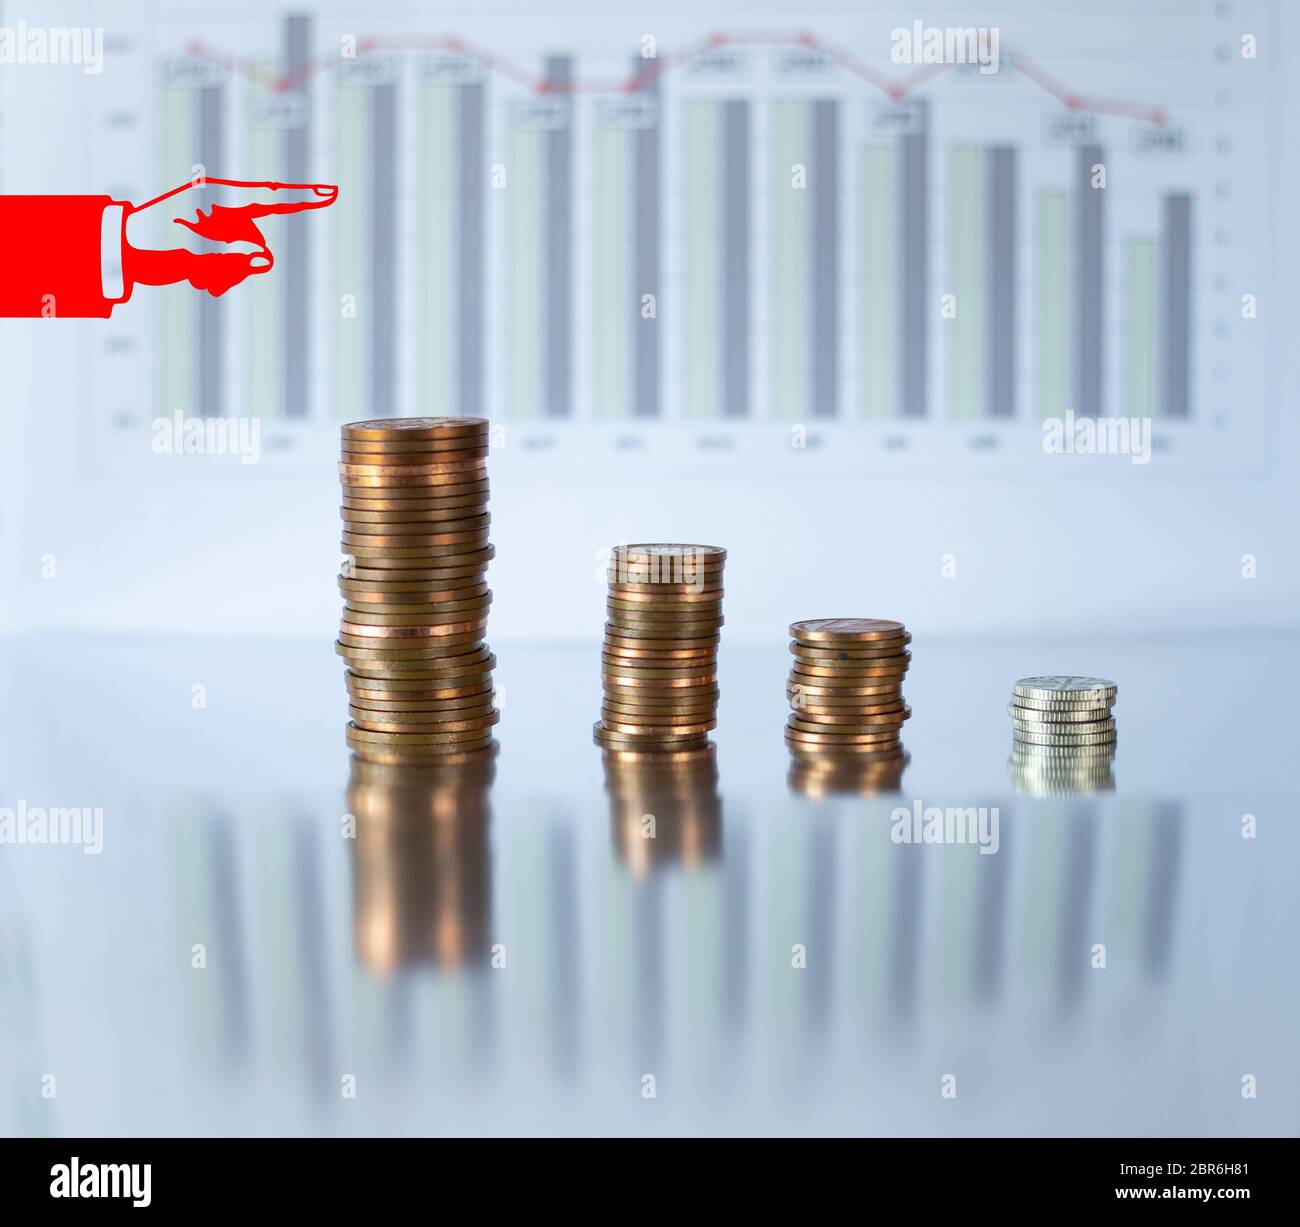 Decreasing piles of coins with red icon of hand pointing out to grath. Concept of financial fall. Economic financial down crisis recession Stock Photo